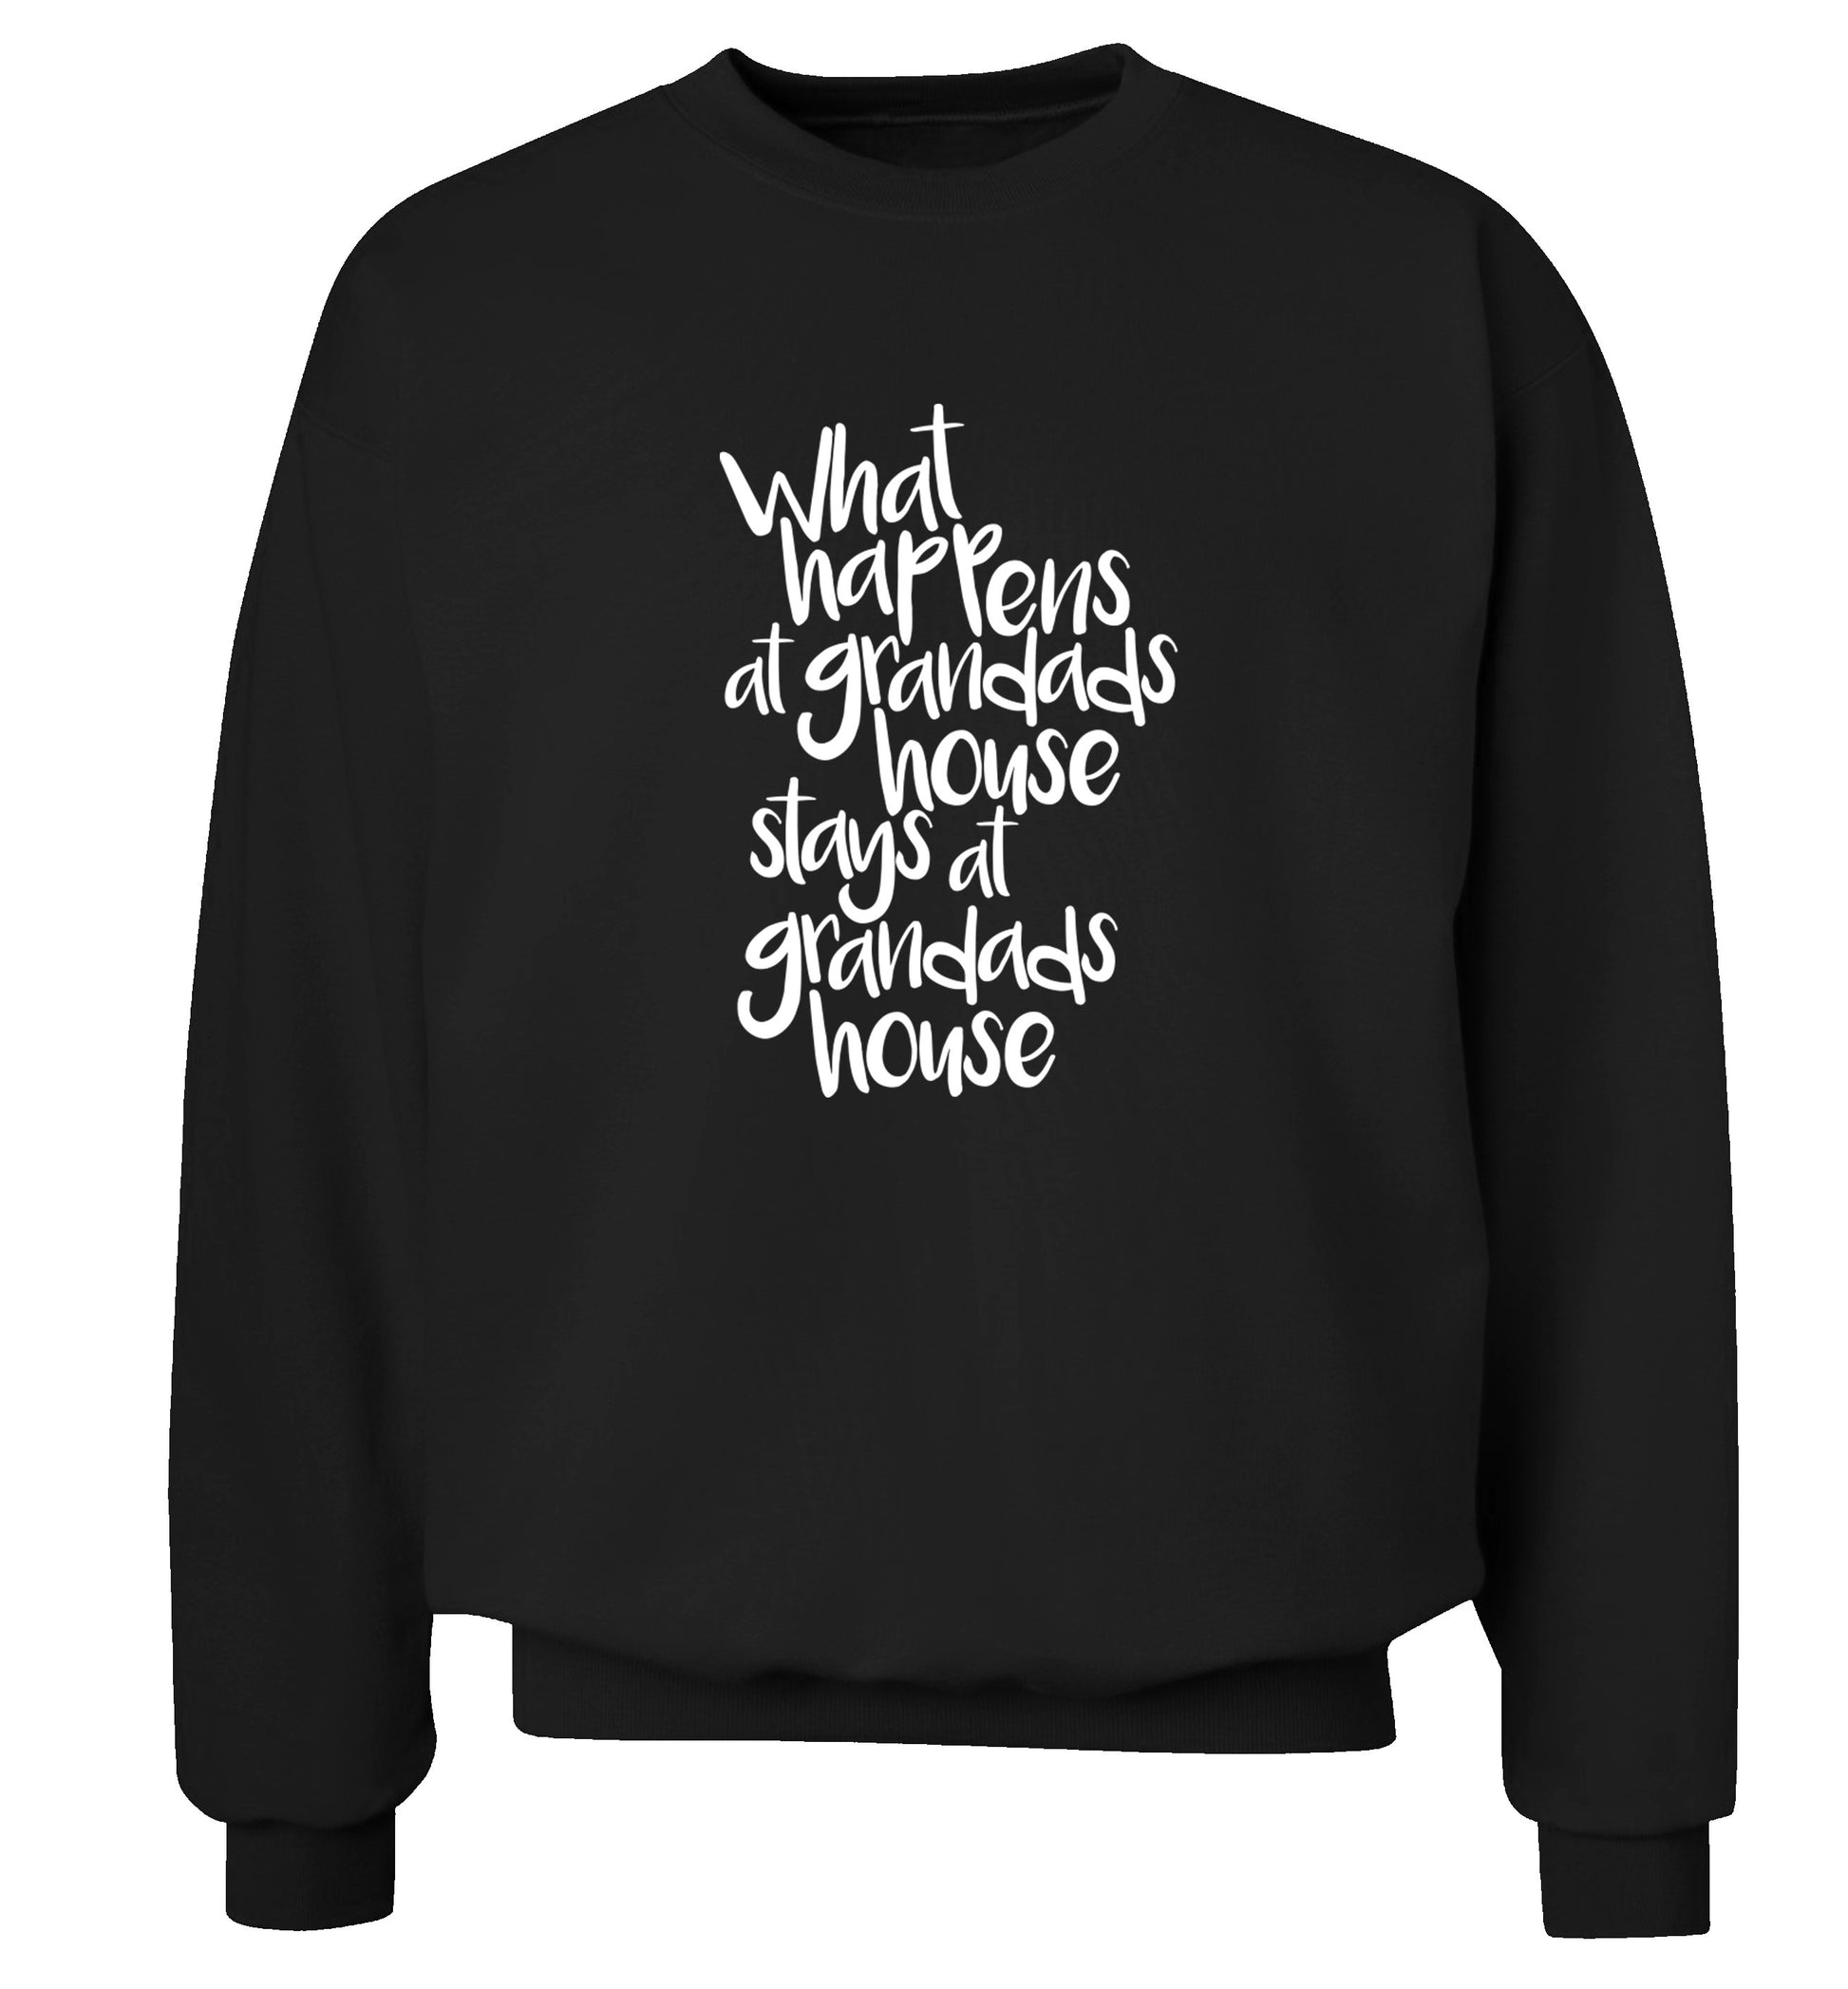 What happens at grandads house stays at grandads house Adult's unisex black Sweater 2XL